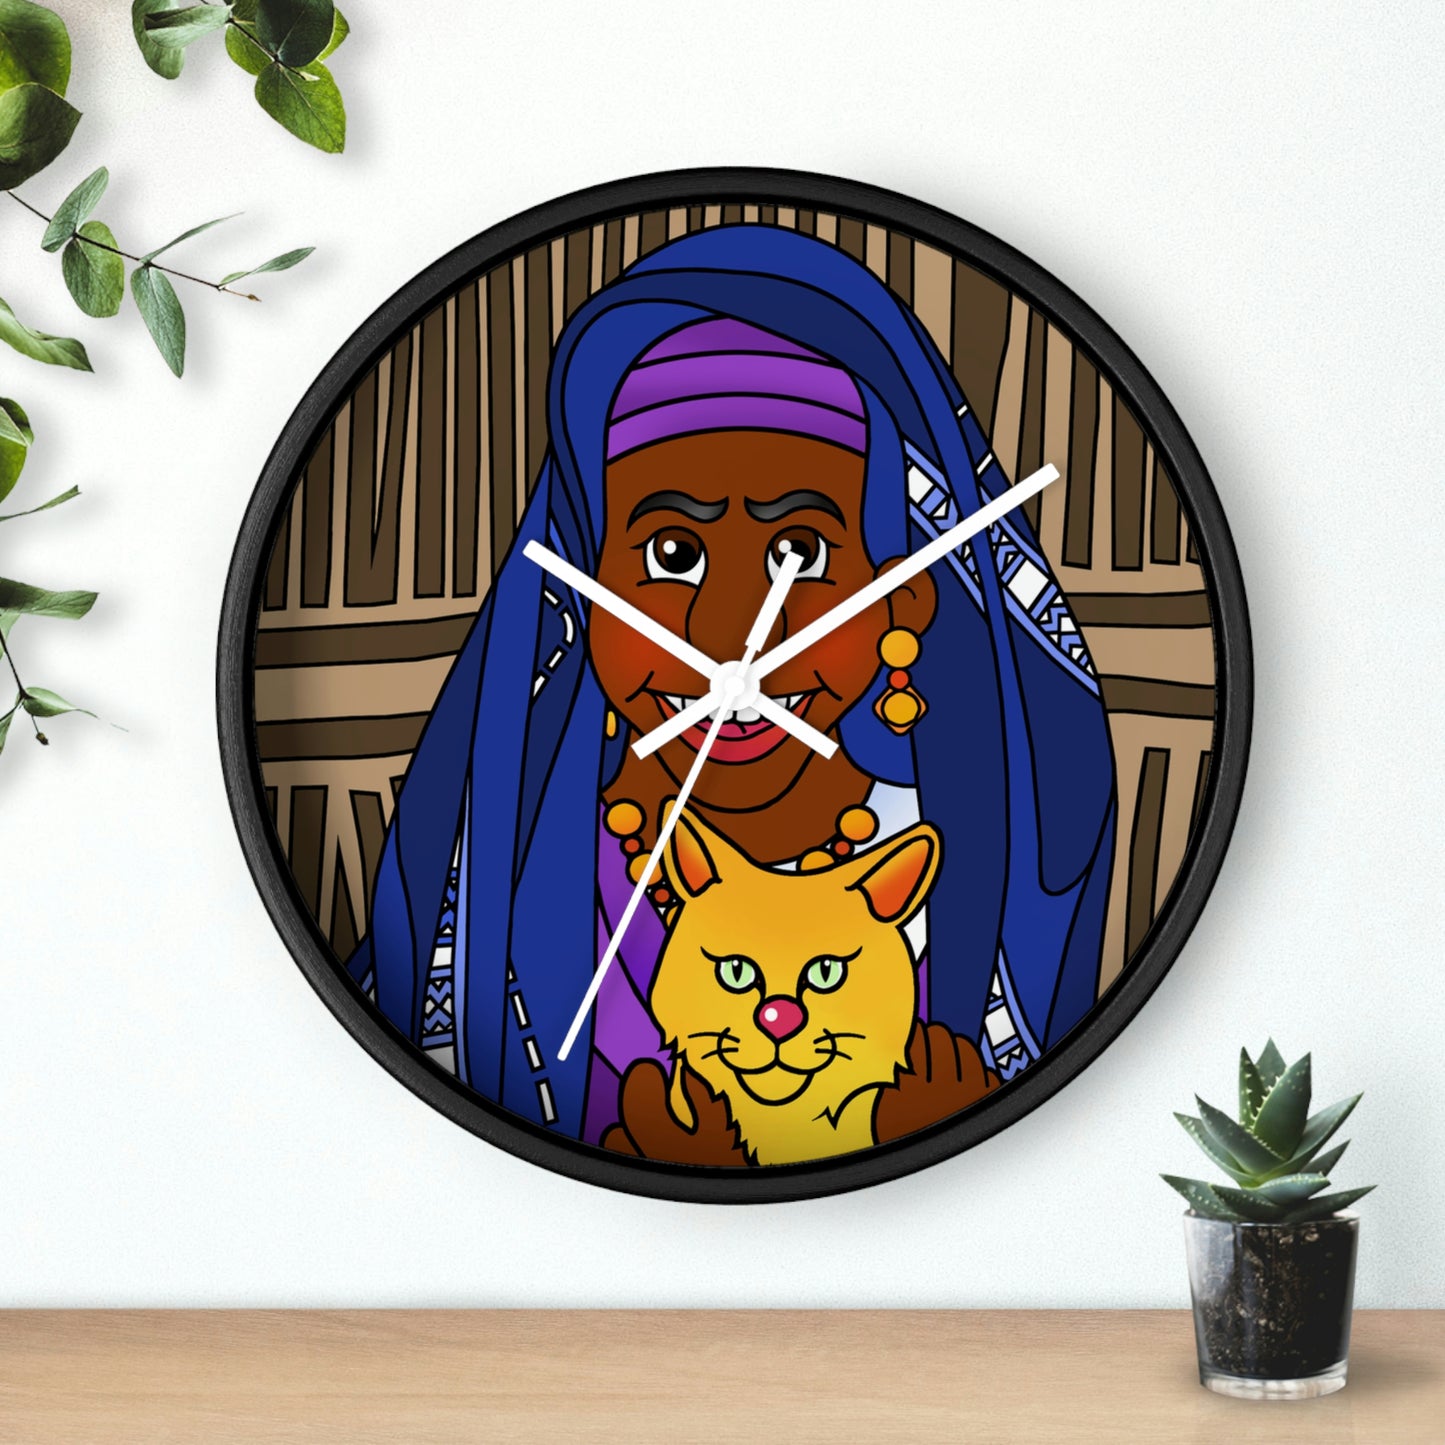 The Kitty Cat Cried Wall clock